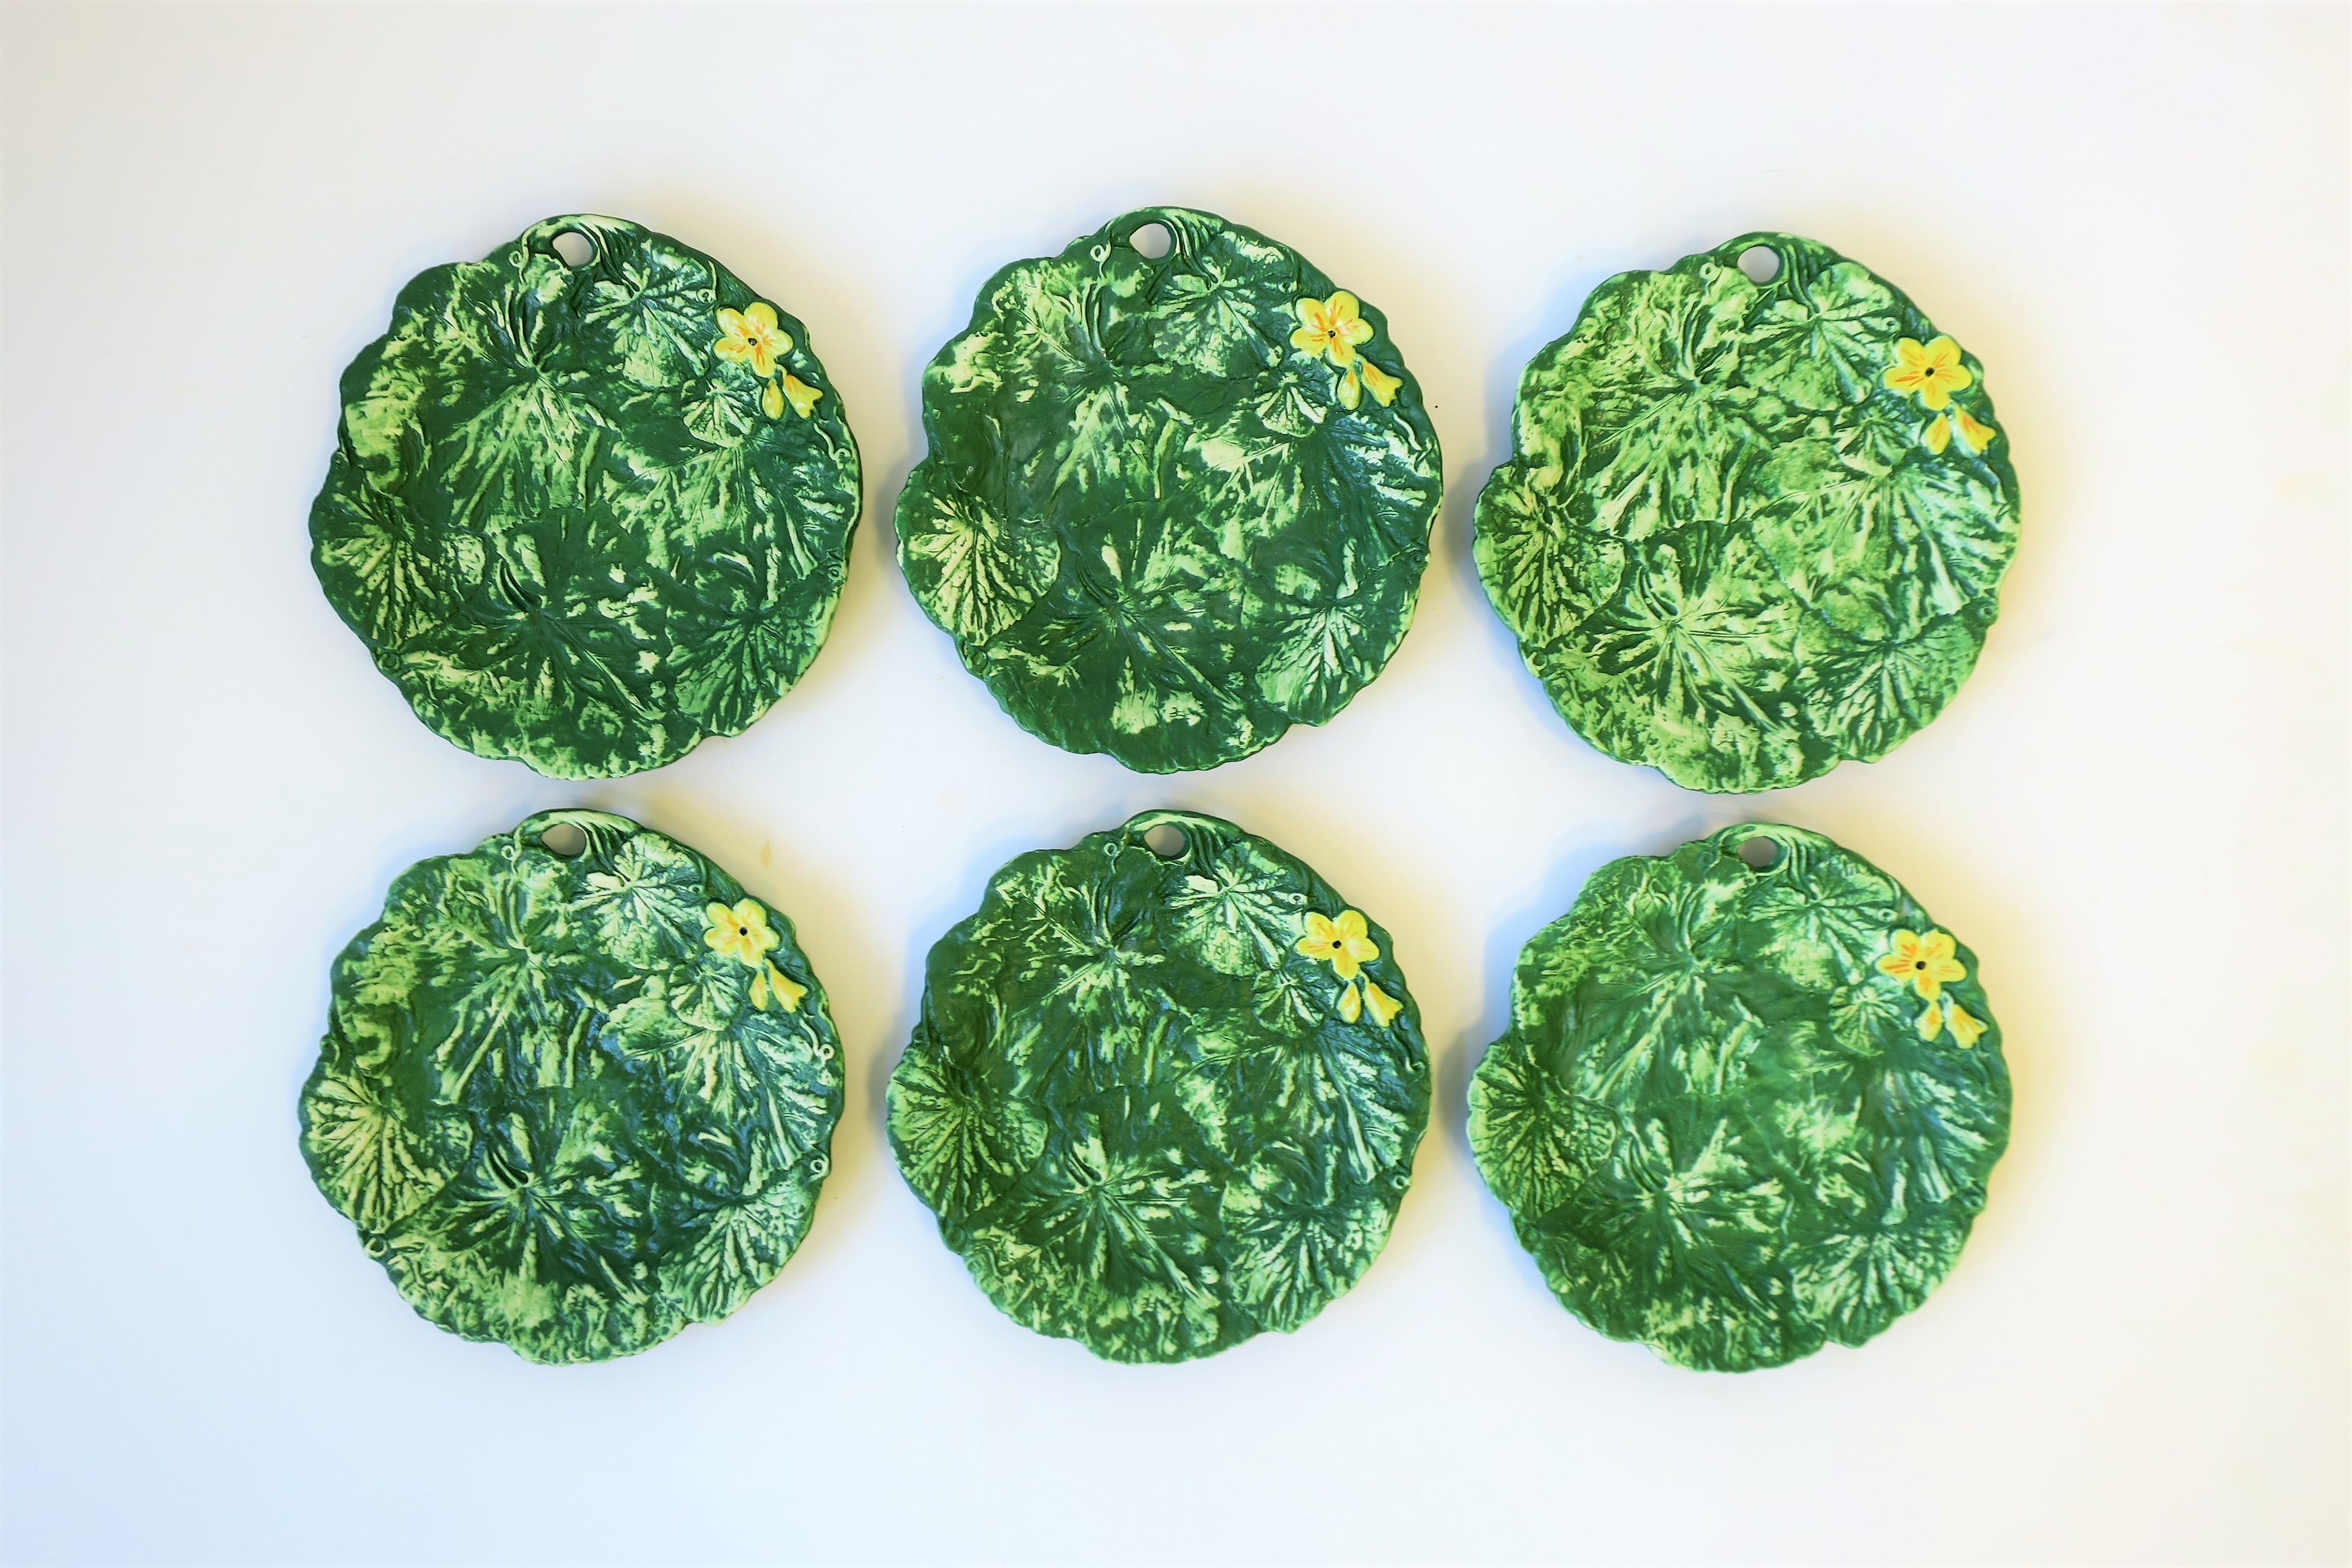 A beautiful set of six (6) Italian green and yellow matte pottery plates with leaf and flower design by designer Ed Langbein, made in Italy, circa mid-20th century. All six plates are marked on back as shown in images. Colors include green with a